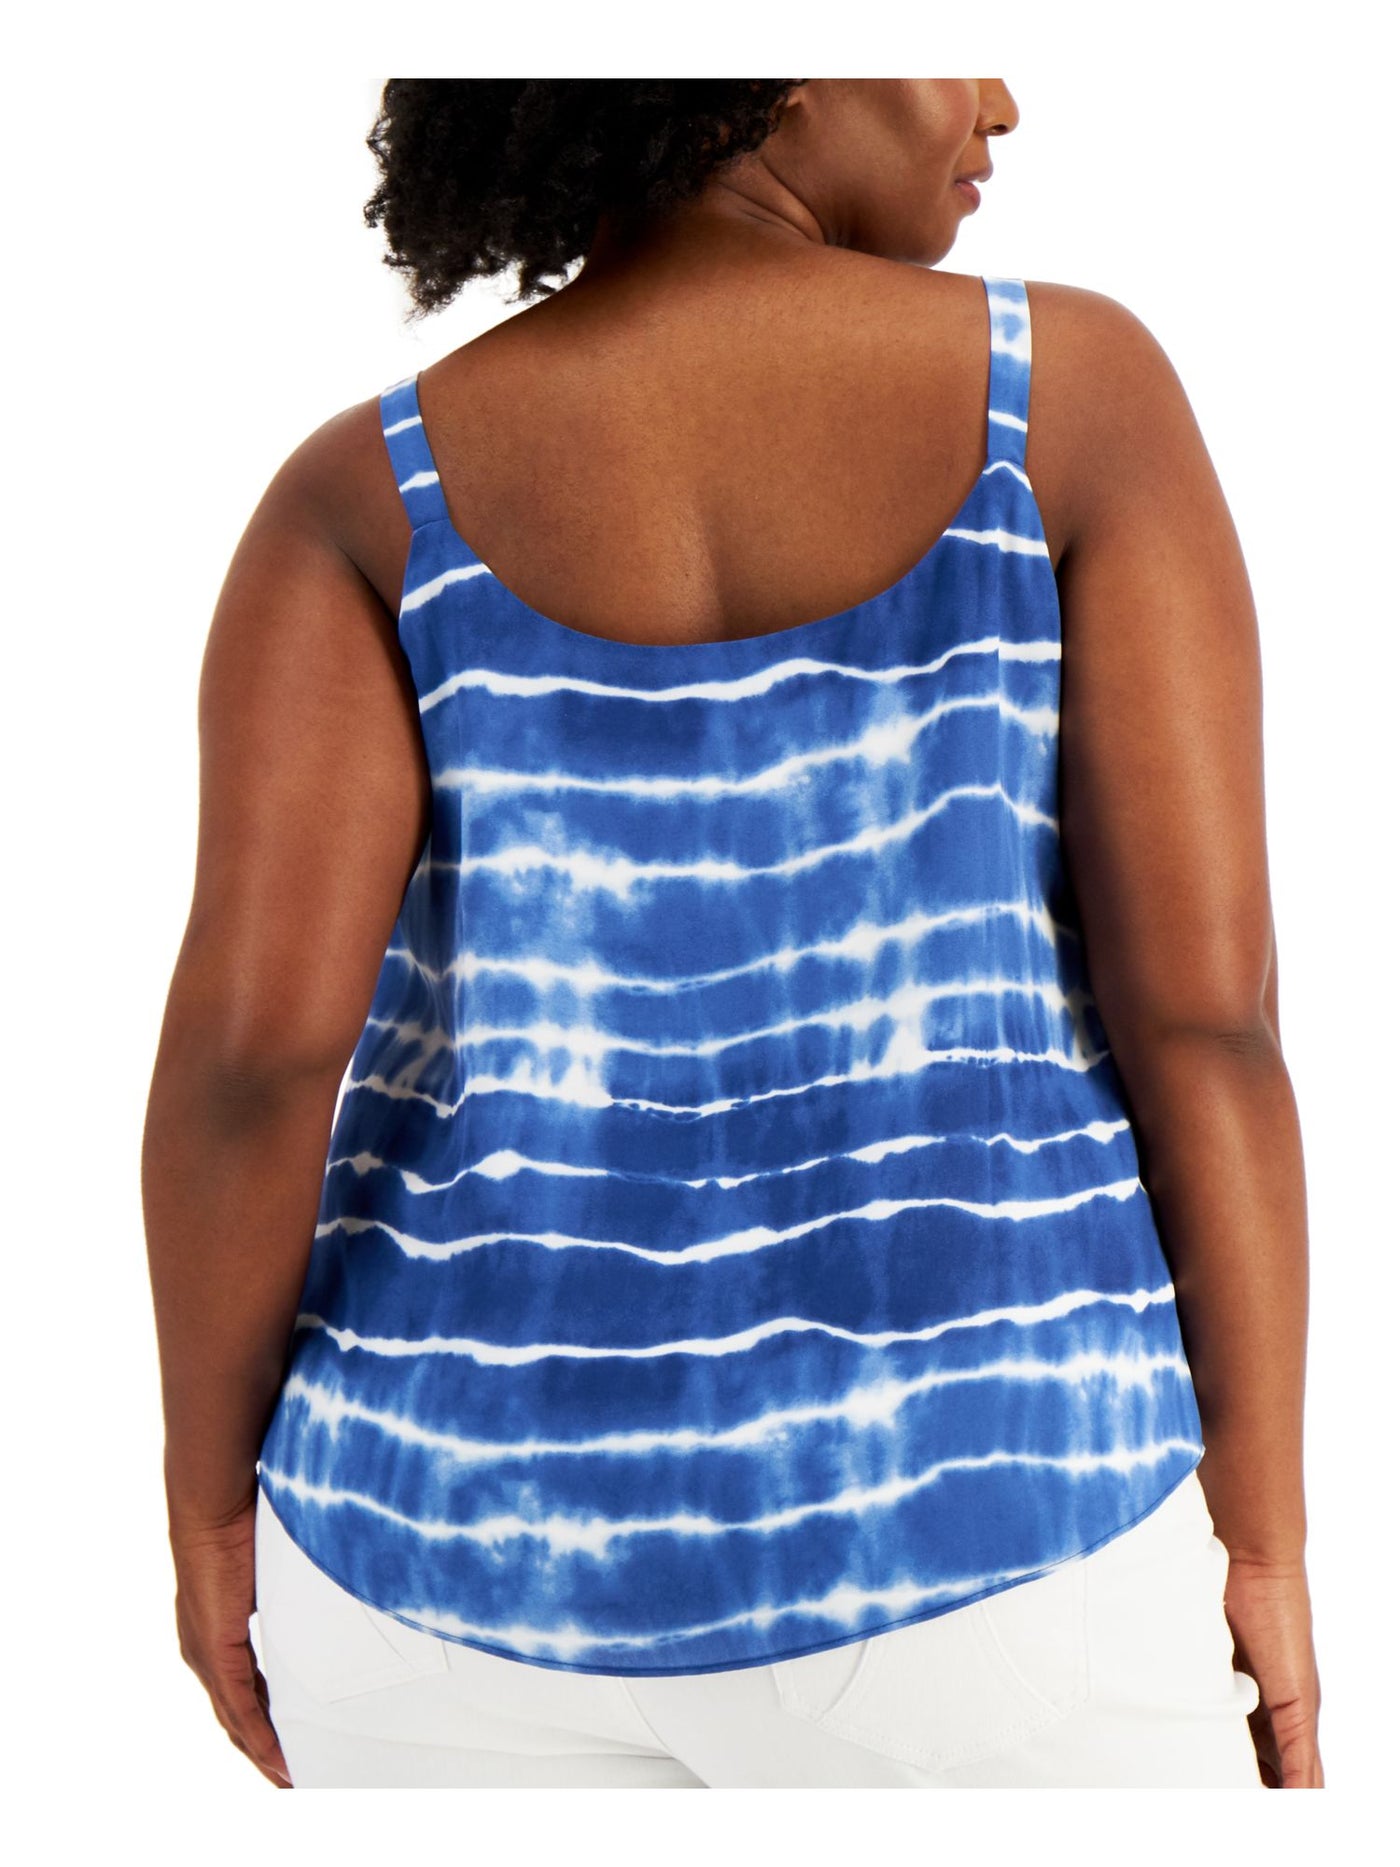 BAR III Womens Blue Darted Curved Hem Lined Tie Dye Sleeveless Scoop Neck Cami Top Plus 3X